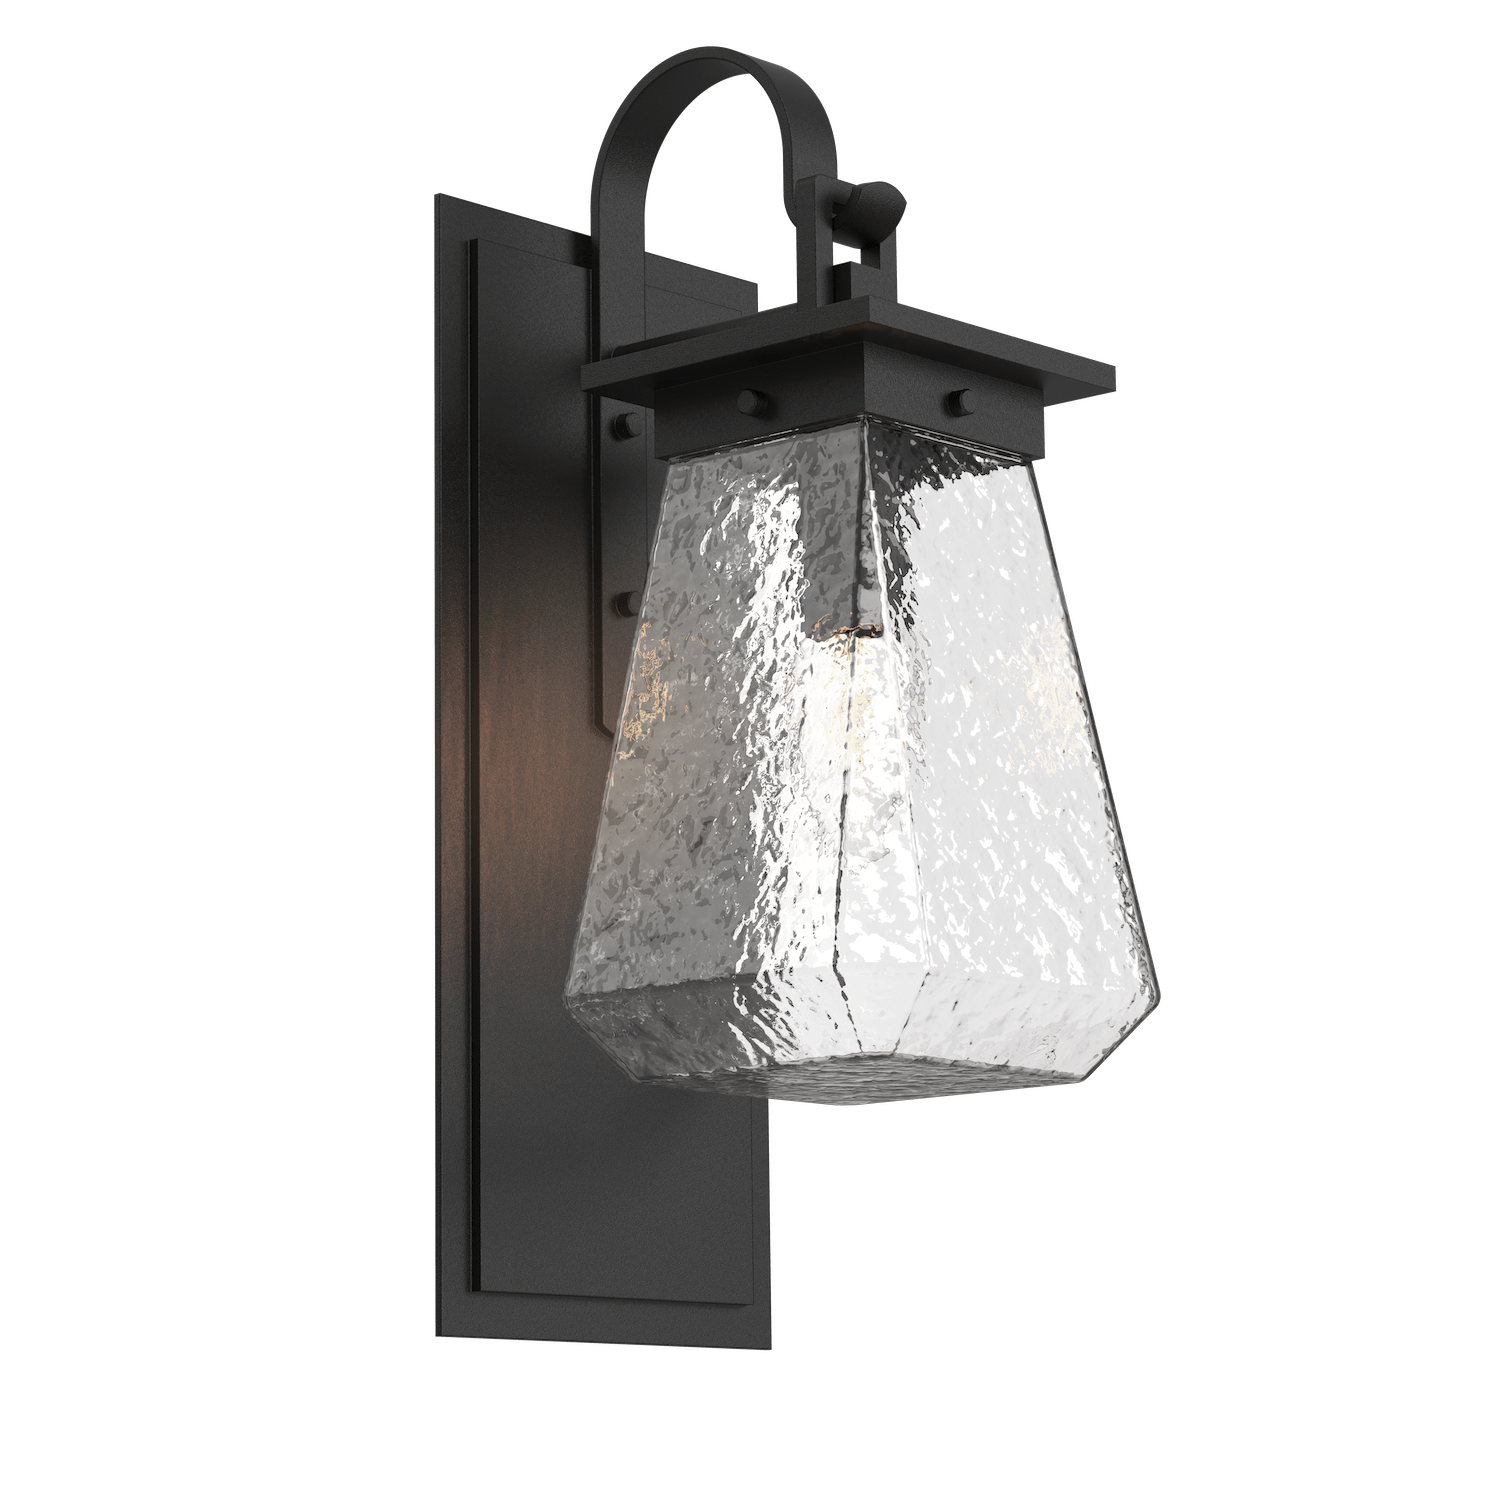 ODB0043-AC-TB-C-Hammerton-Studio-Beacon-18-inch-outdoor-sconce-with-shepherds-hook-with-textured-black-finish-and-clear-blown-glass-shades-and-incandescent-lamping